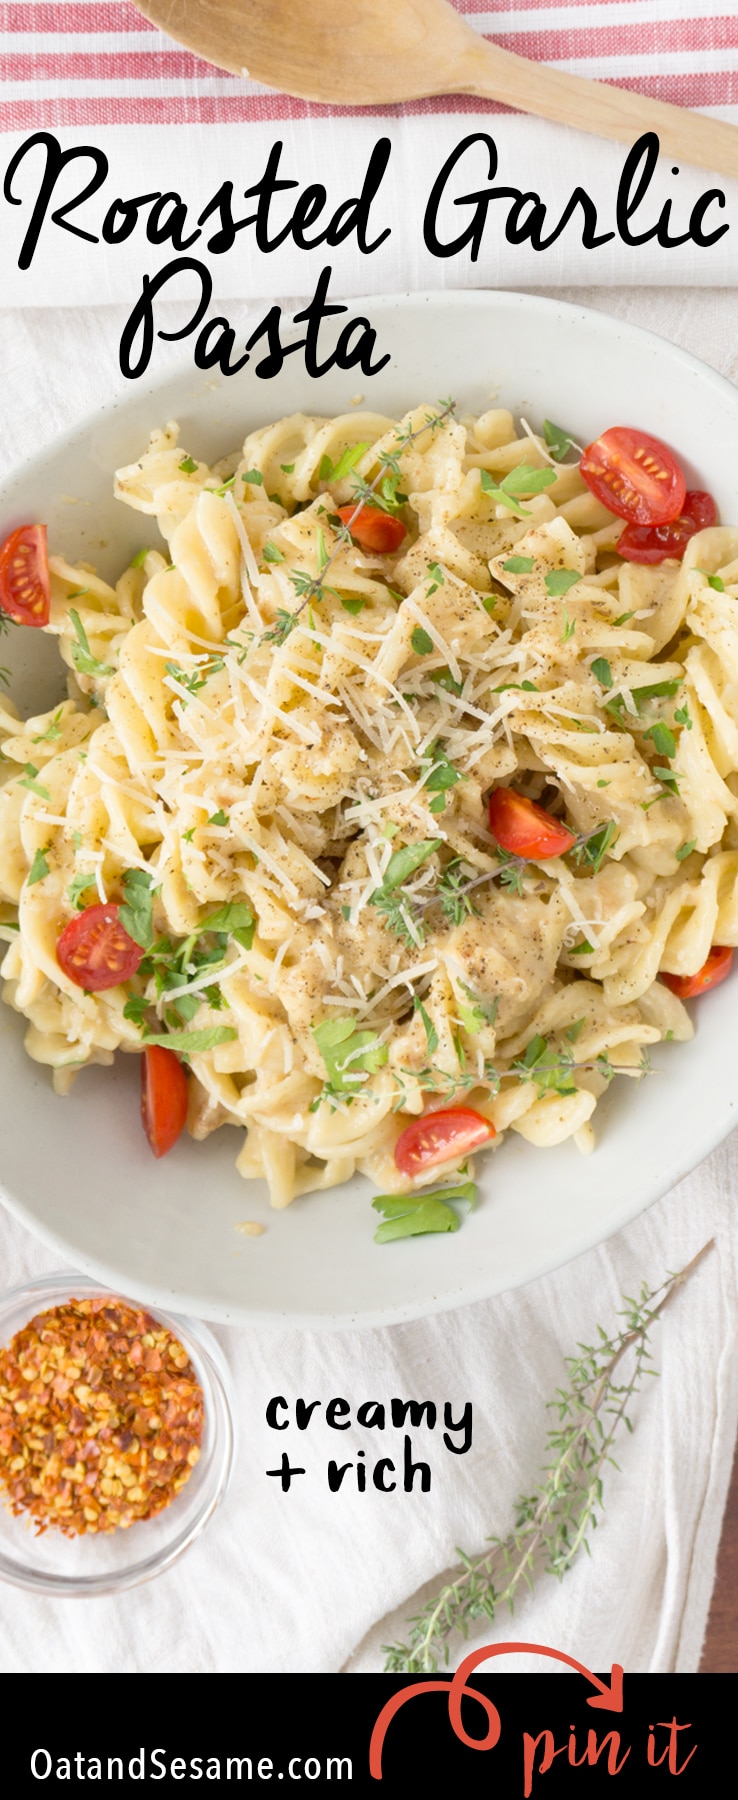 Creamy Roasted Garlic Pasta Sauce - in Under 30 Min you can enjoy this rich garlicky pasta tossed with tomatoes and fresh parsley to balance it out | #GARLIC | #PASTA | #Recipe at OatandSesame.com